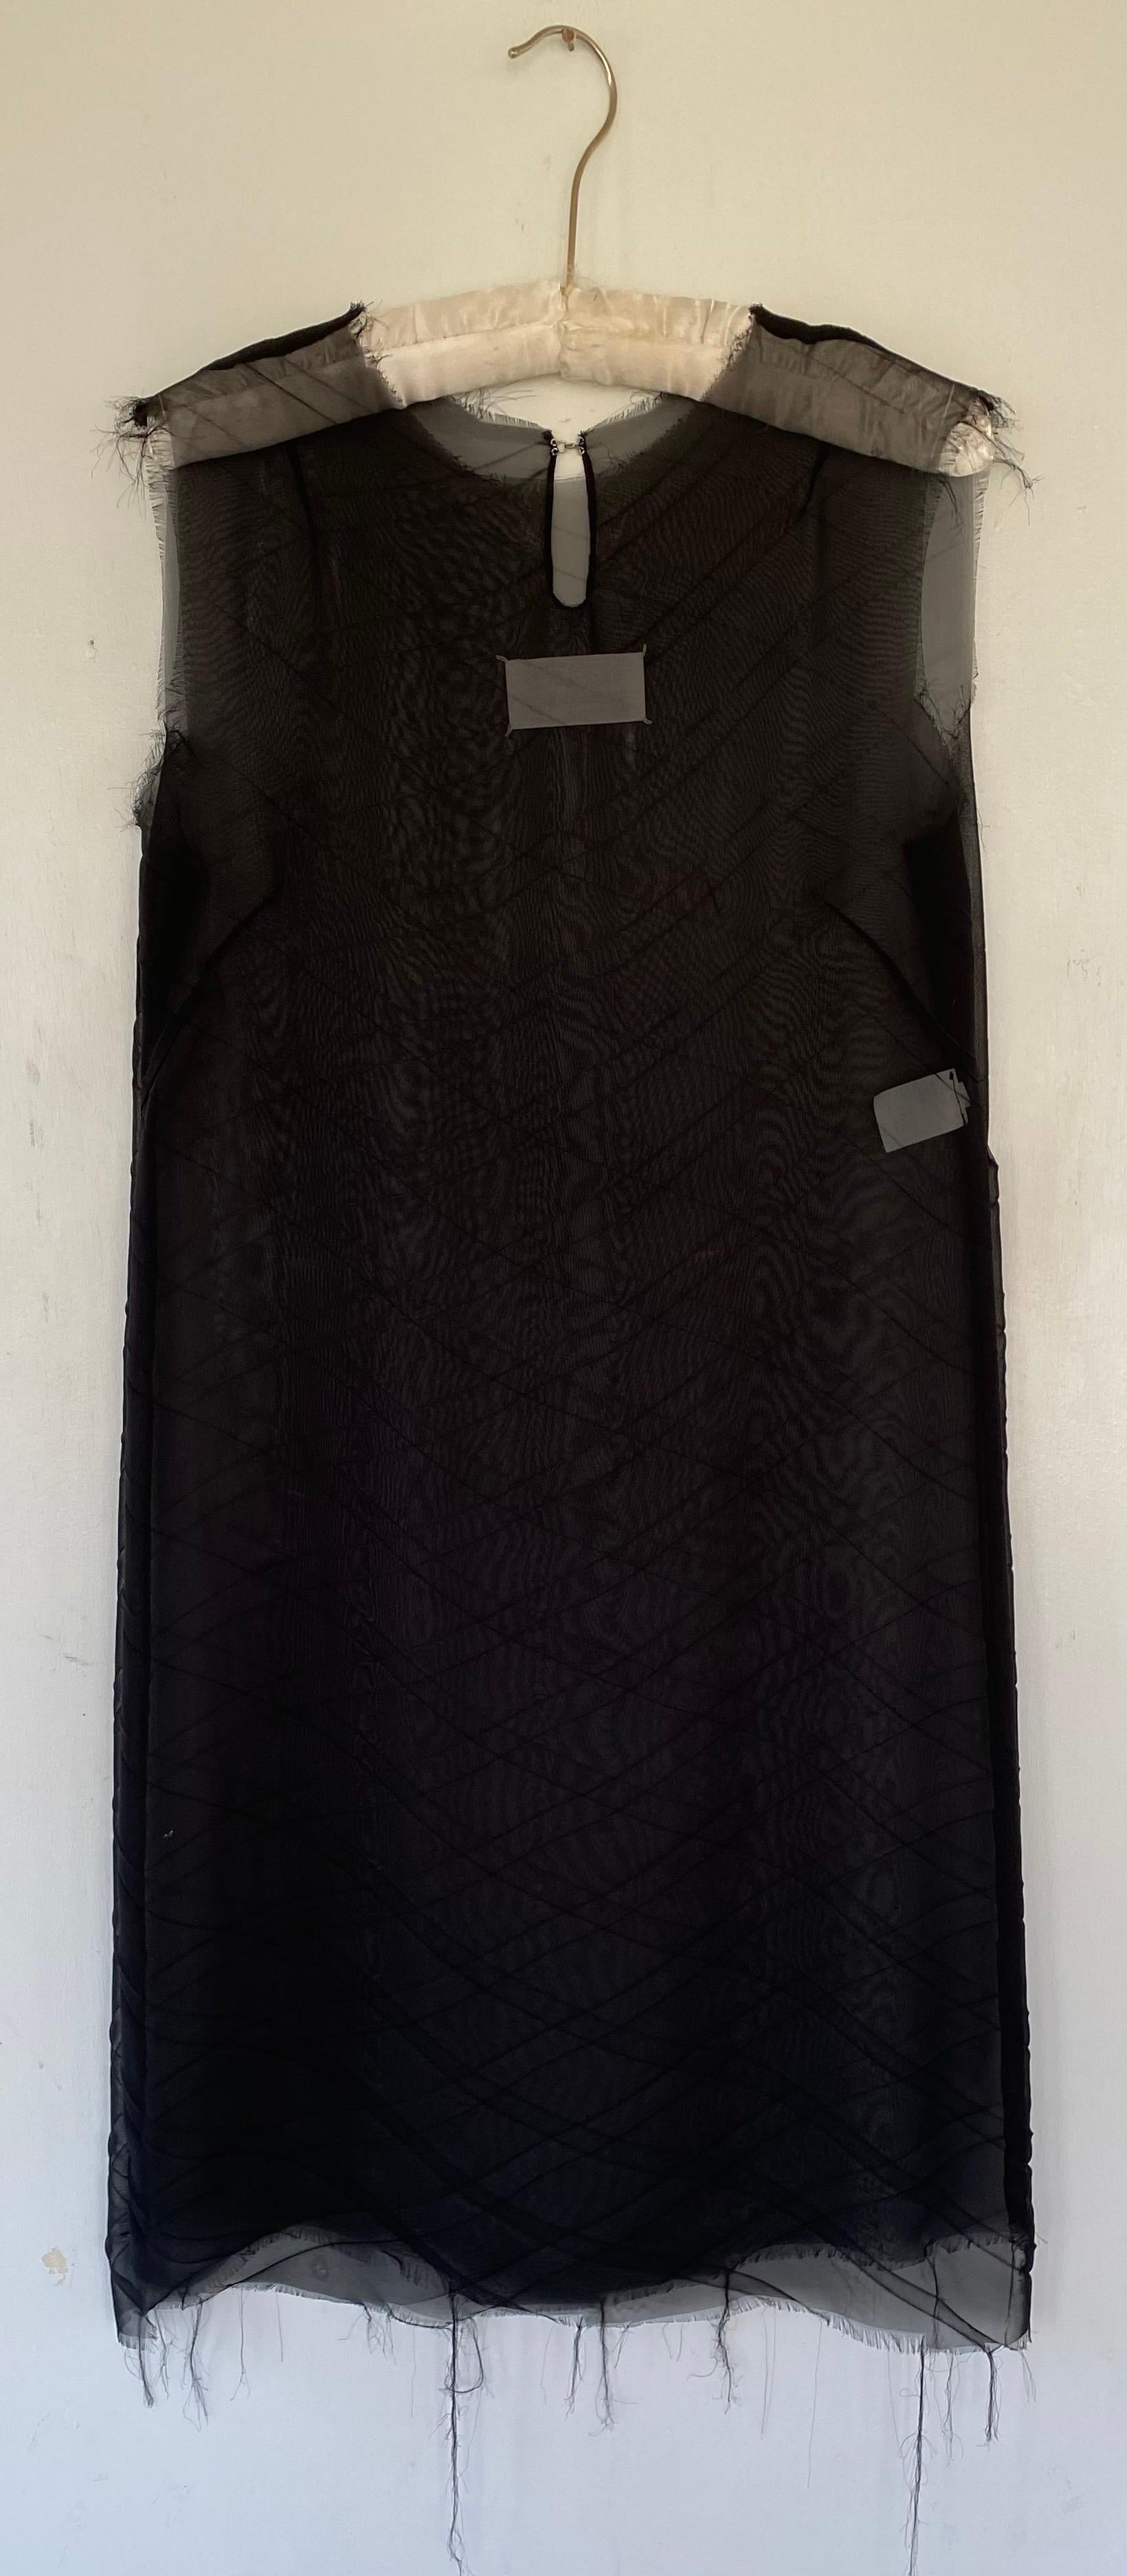 Maison Martin Margiela dress from the 1990s , I believe this dates to 1997  
Collar , hem and sleeves are raw 
Closes at the back with hook and eye 
Ghost label 
Size 42 
Excellent condition 
100% poly